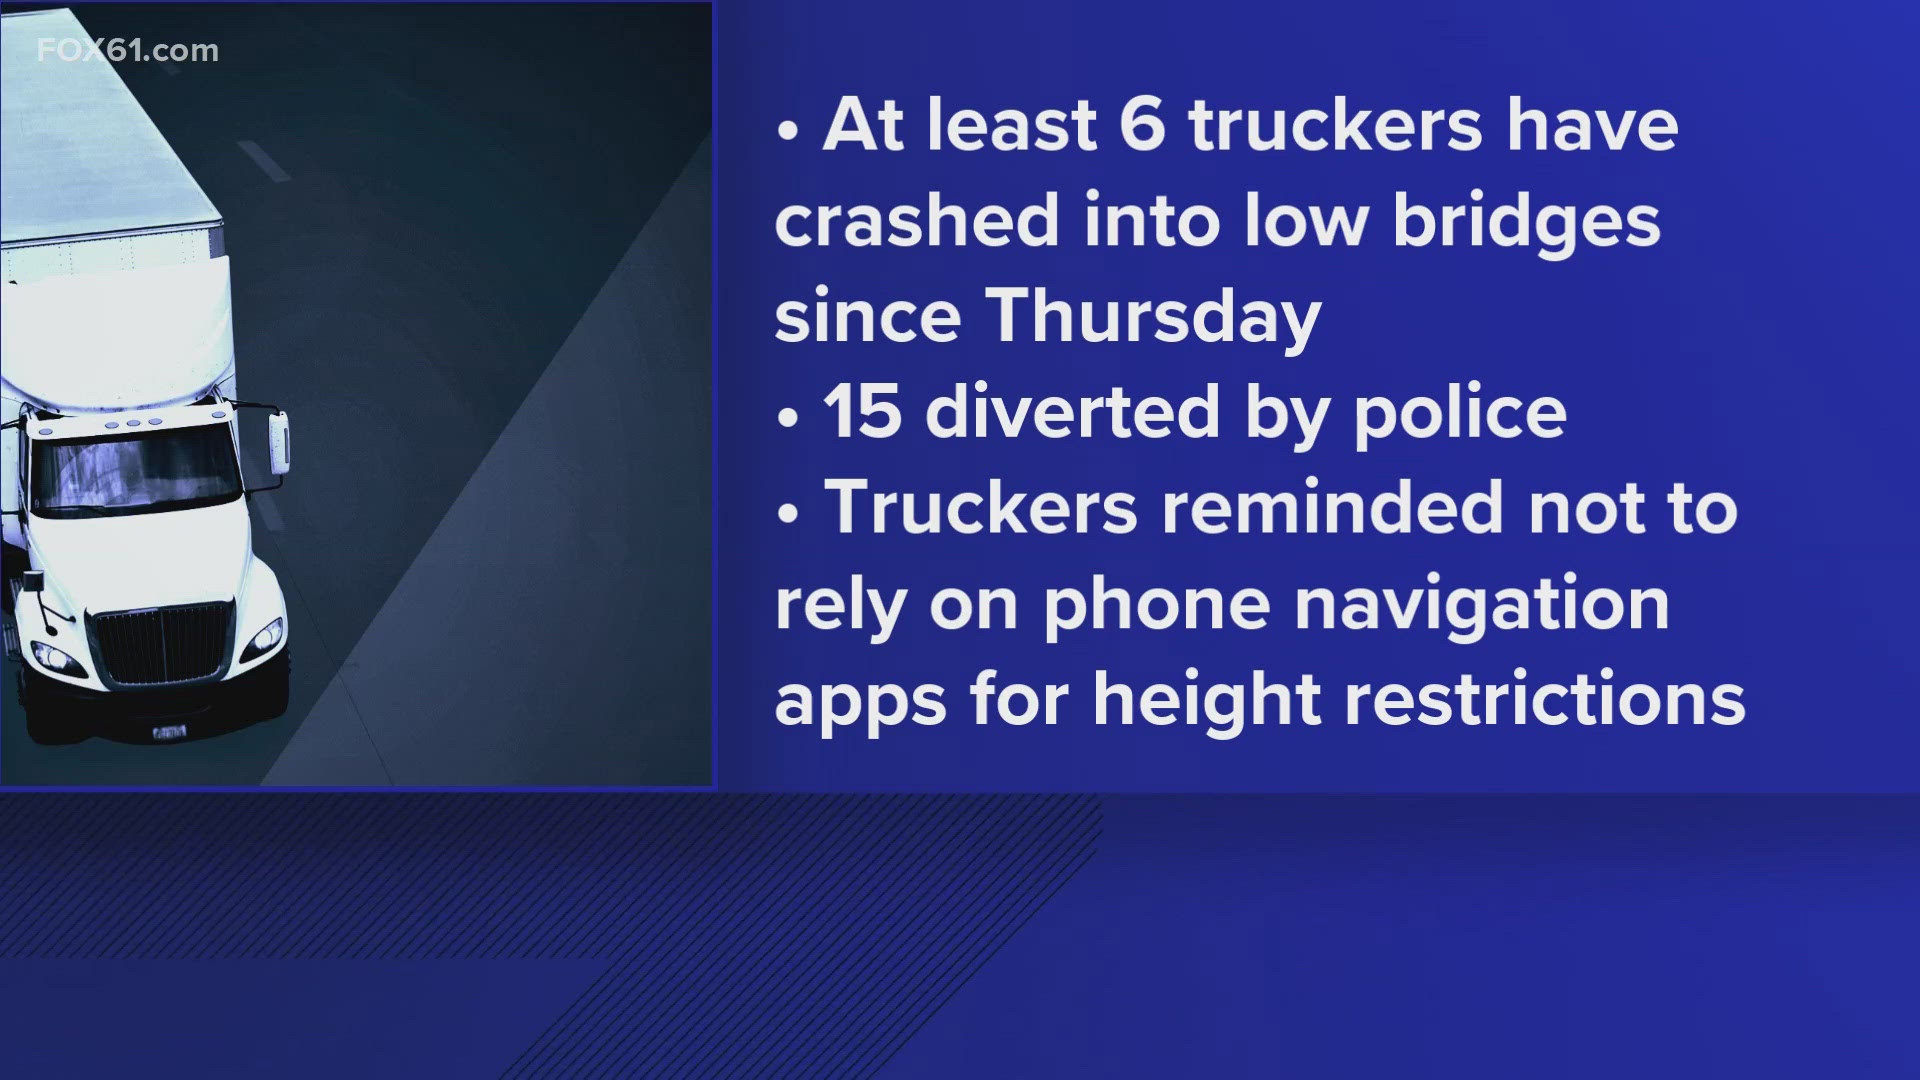 In addition to those who hit bridges, police had to divert another 15 truck drivers from doing the same thing.